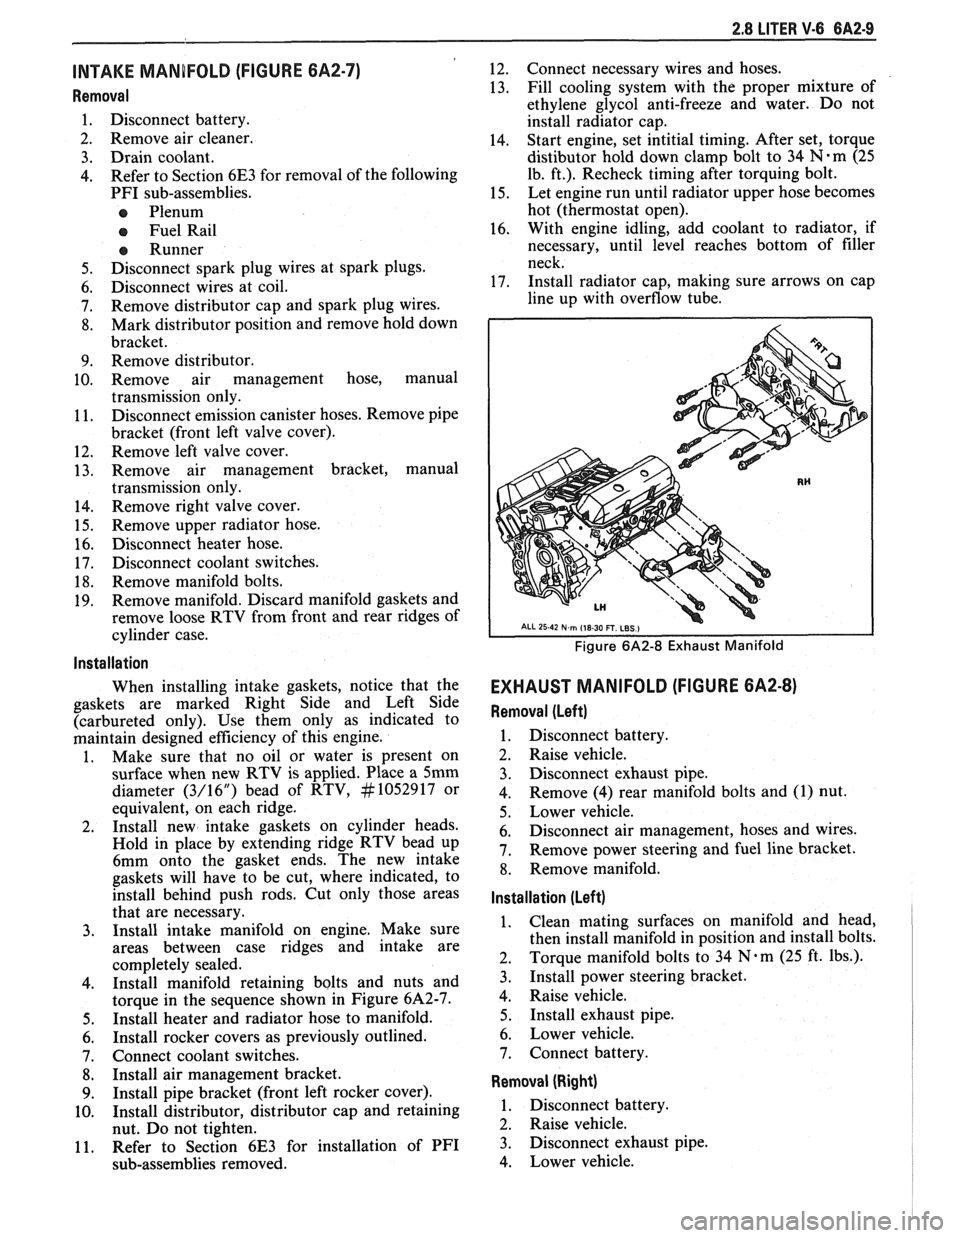 PONTIAC FIERO 1988  Service Repair Manual 
2.8 LITER V-6 6A2-9 
INTAKE MANIFOLD  (FIGURE 6A2-7) 
Removal 
Disconnect battery.  
Remove air  cleaner. 
Drain  coolant. 
Refer  to Section  6E3 for removal  of the  following 
PFI  sub-assemblies.